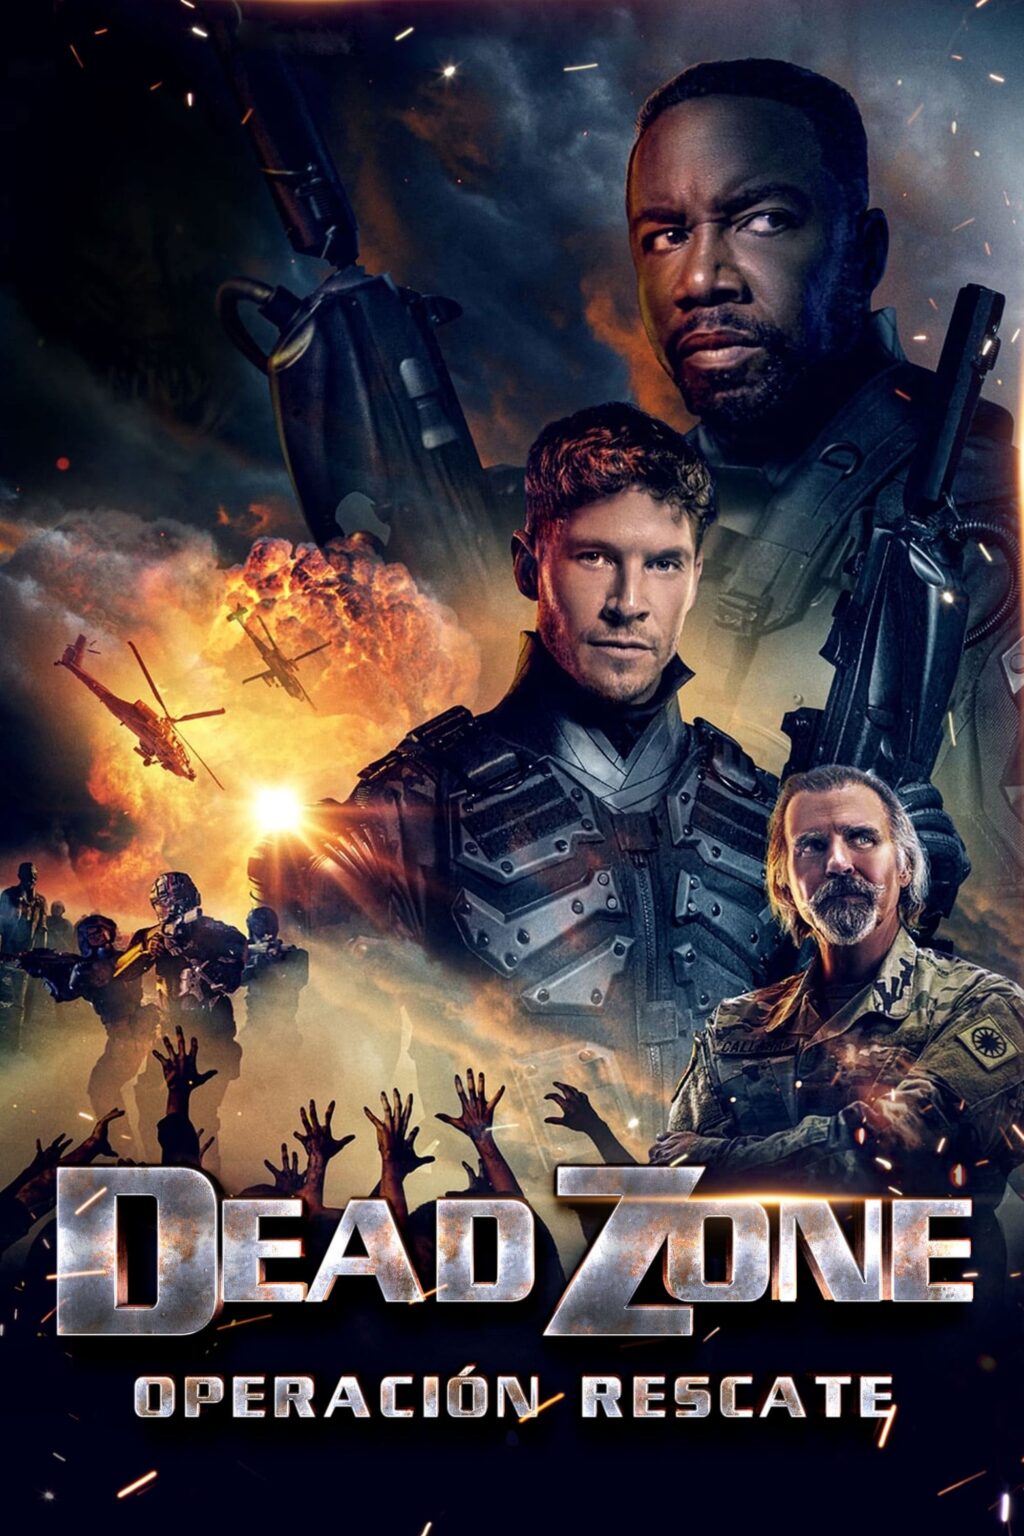 Poster for the movie "Dead Zone"